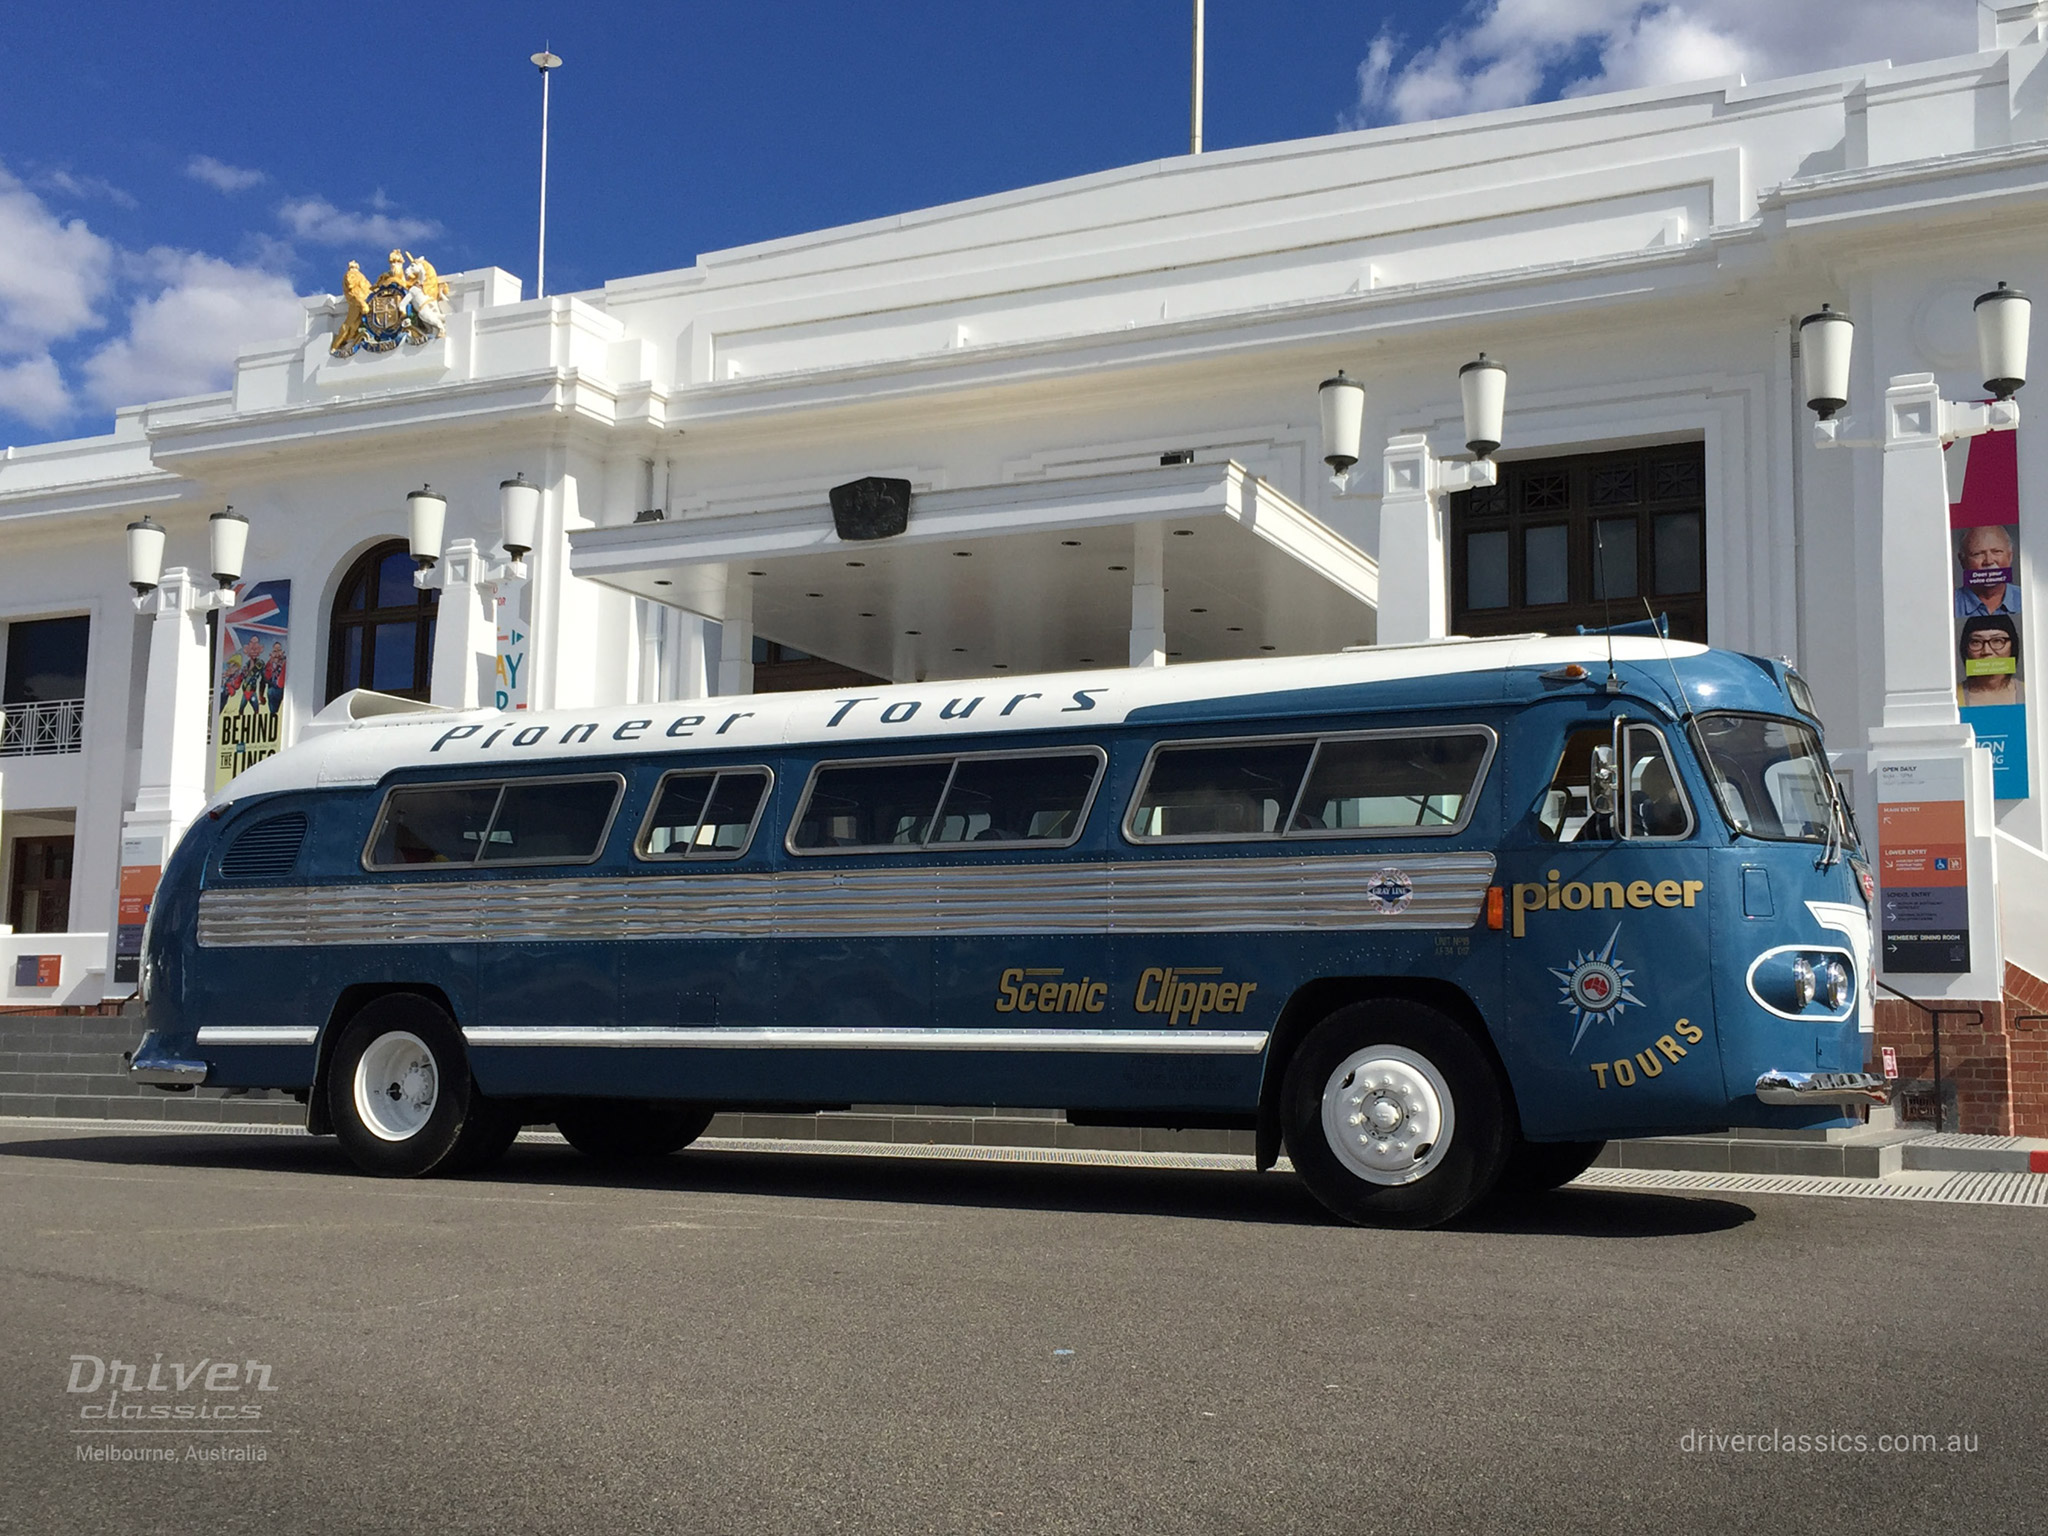 1954 Flxible Clipper bus at Old Parliament House